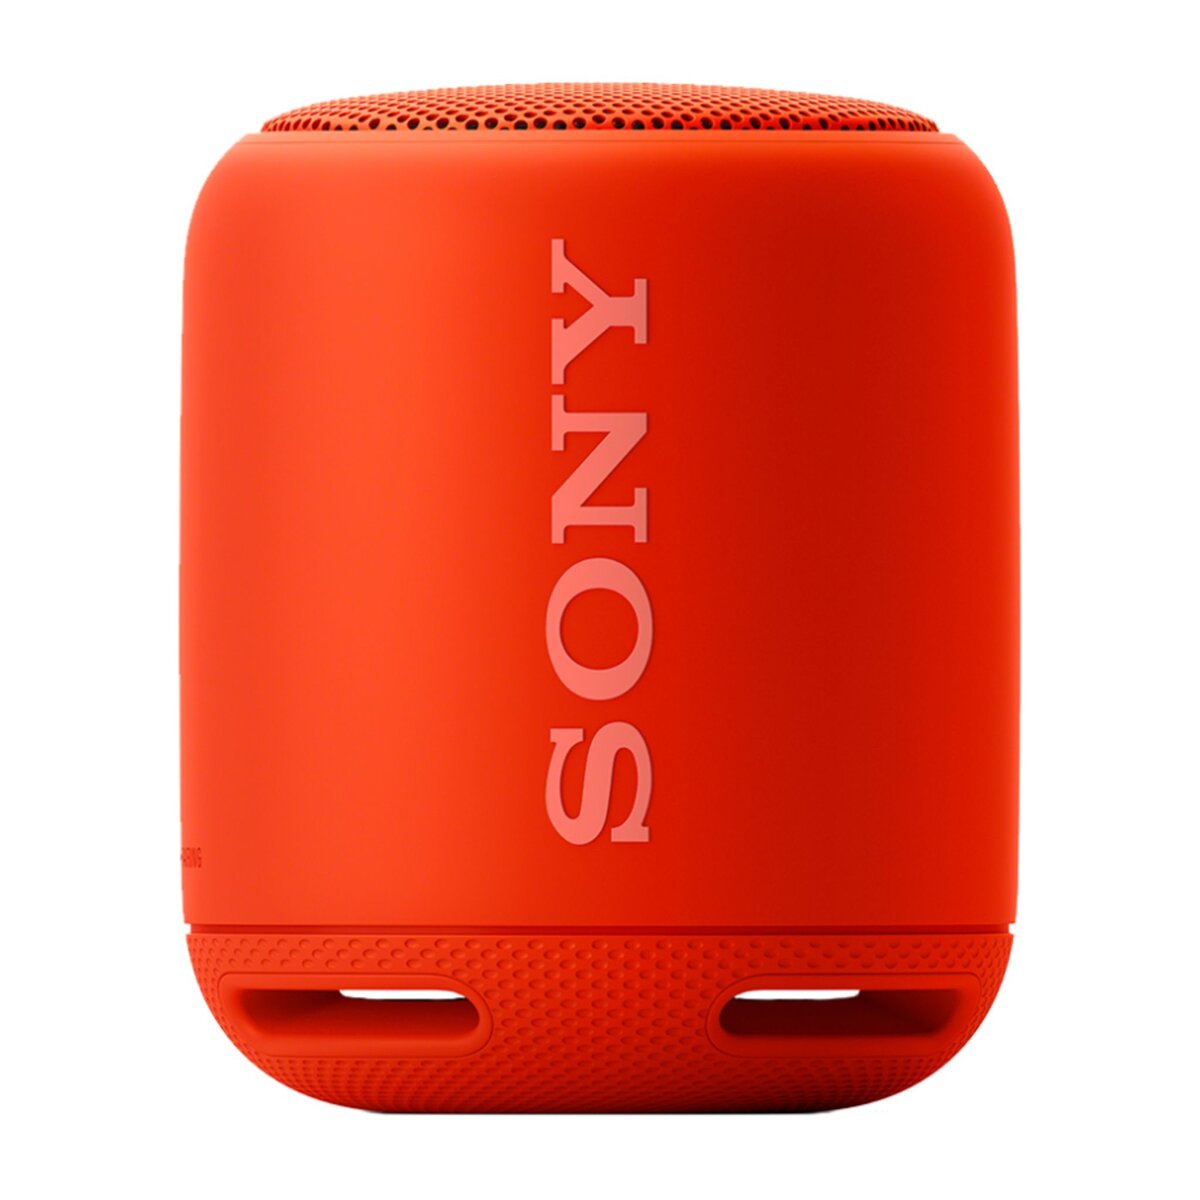 SONY Extra Bass SRS-XB10 - Rouge - Enceinte portable